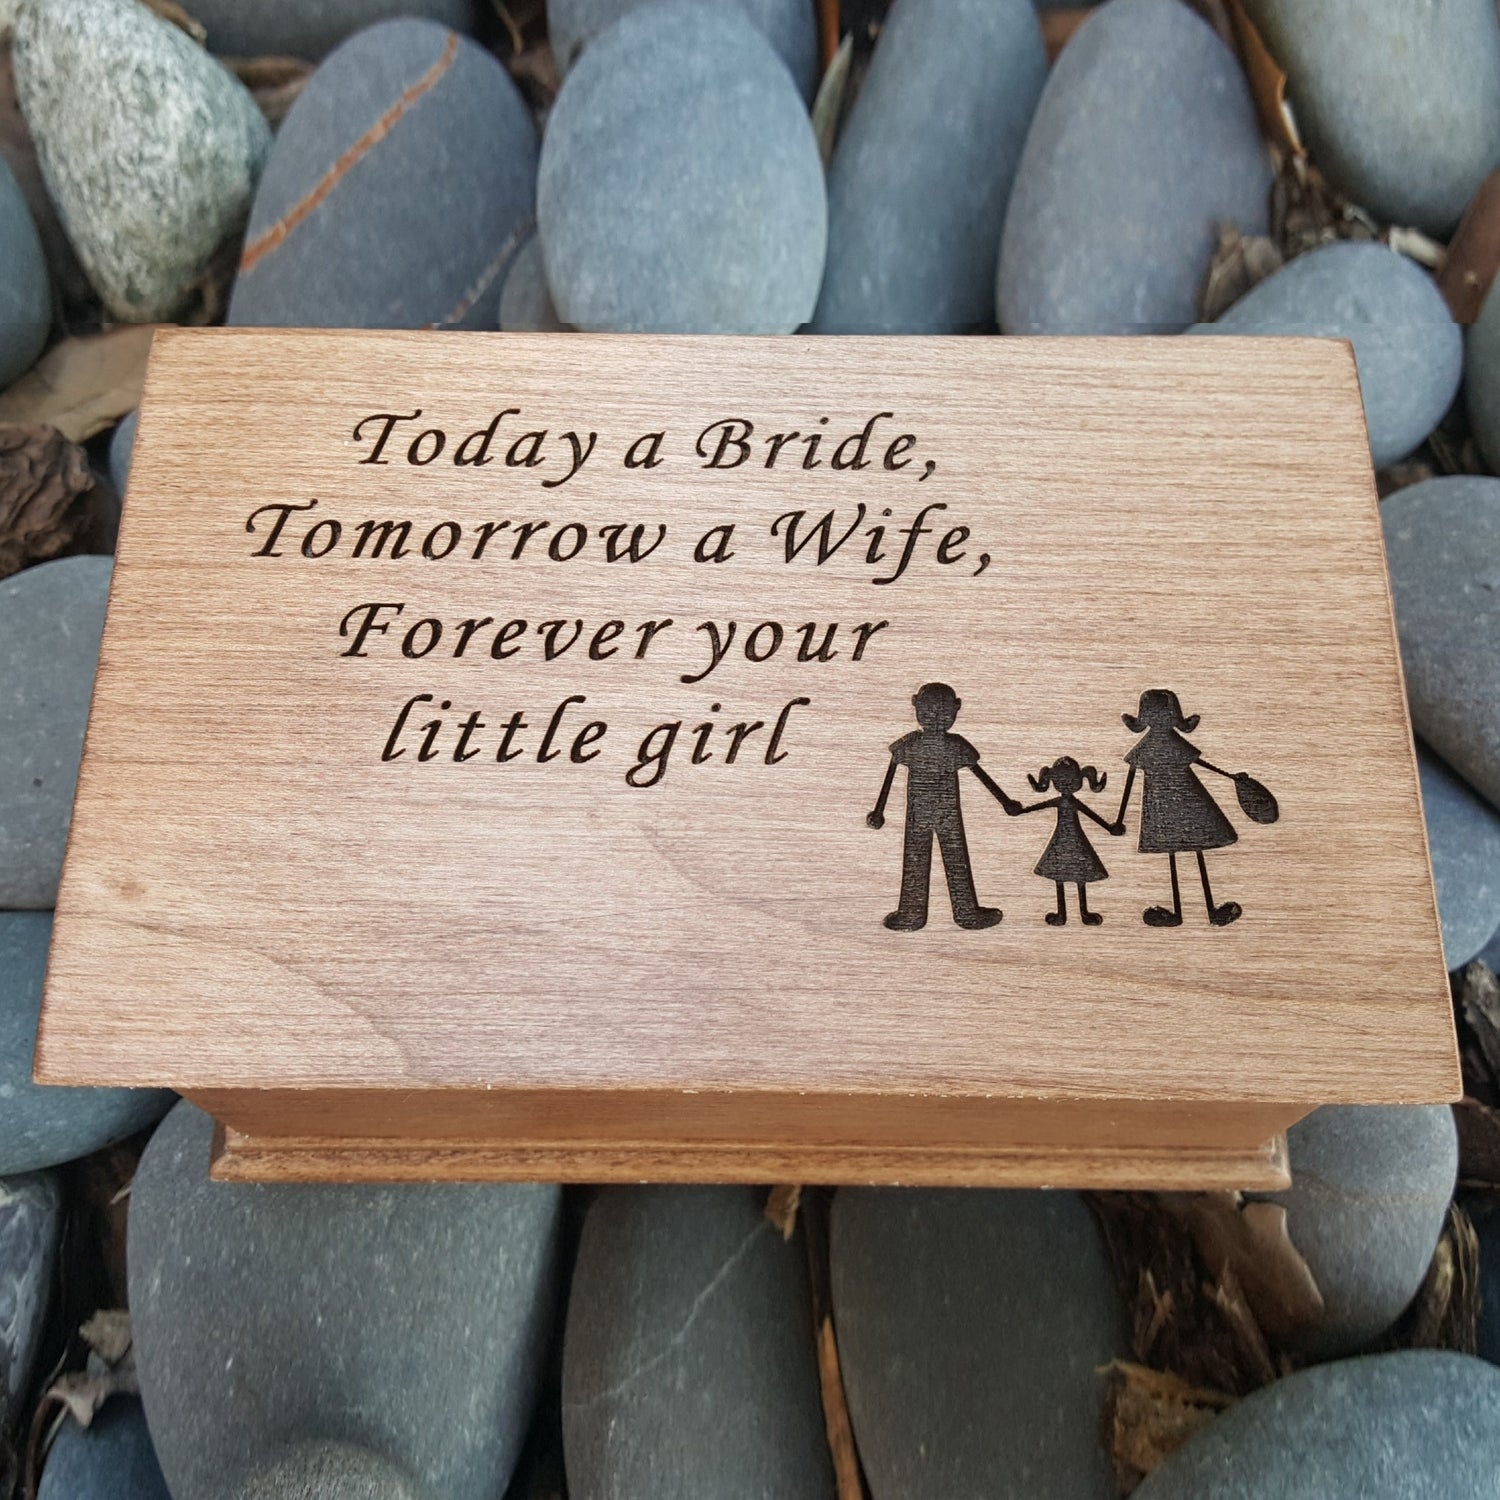 Wooden jewelry box engraved with Today a bride, tomorrow a wife, forever your little girl along with a silhouette image of dad-daughter-mom, choose color and song